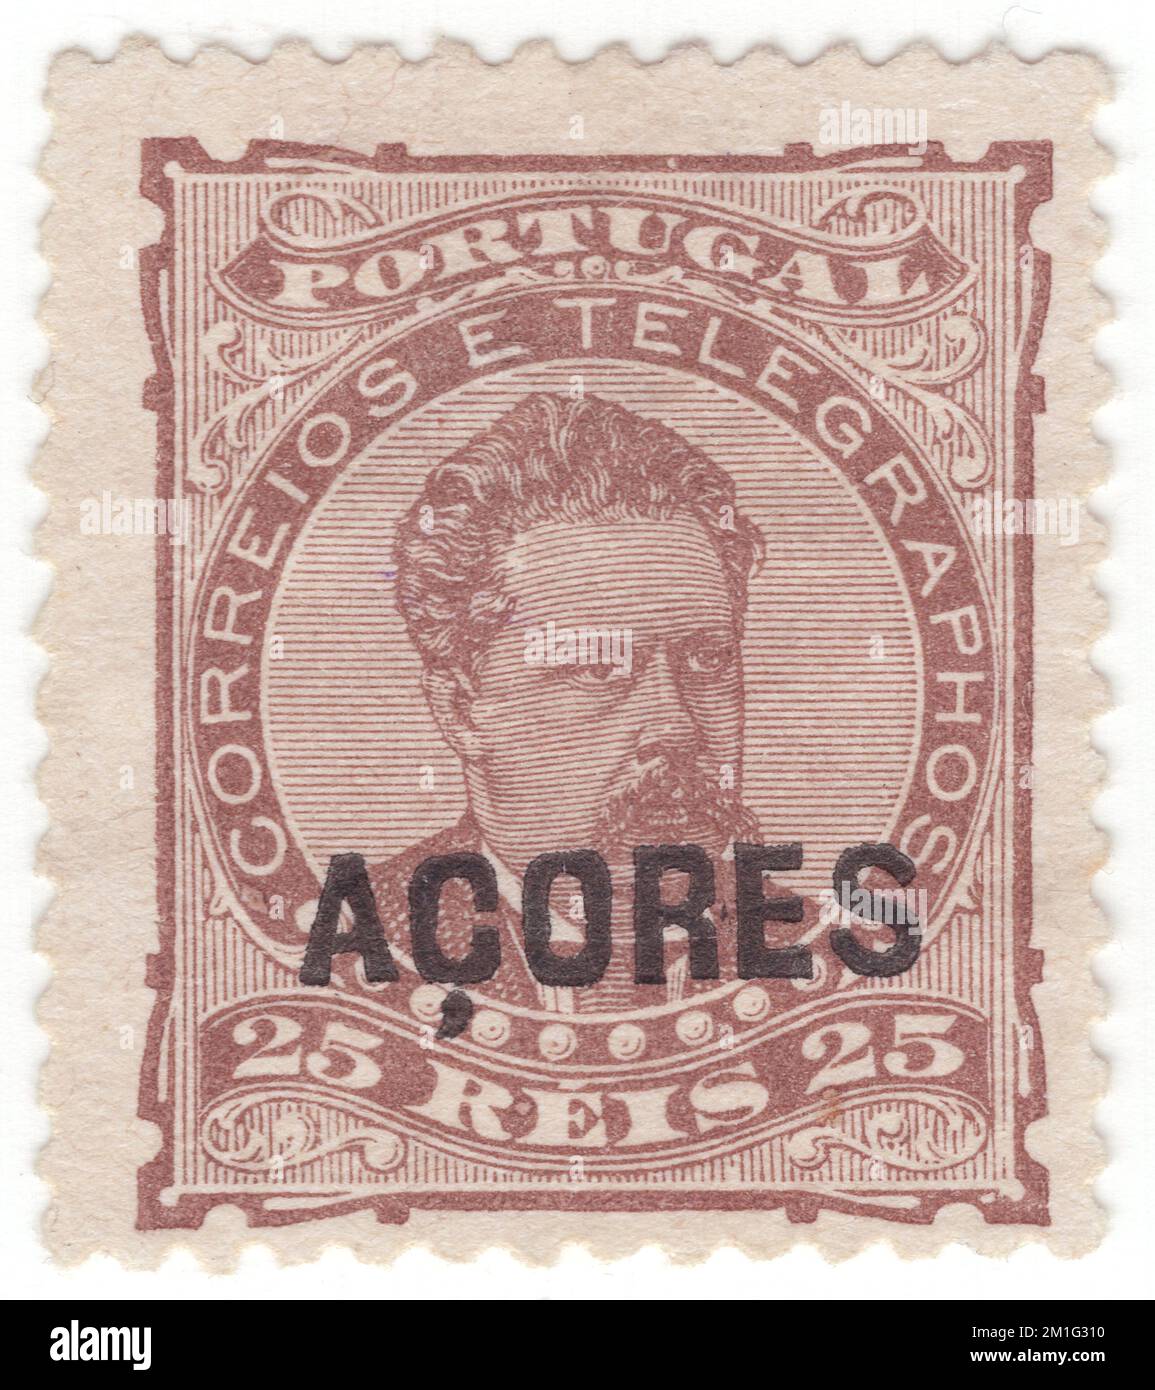 AZORES - 1882: An 25 reis brown postage stamp depicting portrait of King Luiz (Dom Luís I). Stamps of Portugal overprinted in black 'ACORES'. Dom Luís I (31 October 1838, in Lisbon – 19 October 1889, in Cascais), known as The Popular was a member of the ruling House of Braganza, and King of Portugal from 1861 to 1889. The second son of Queen Maria II and her consort, King Ferdinand, he acceded to the throne upon the death of his elder brother King Pedro V. Luís was a cultured man who wrote vernacular poetry, but had no distinguishing gifts in the politics Stock Photo